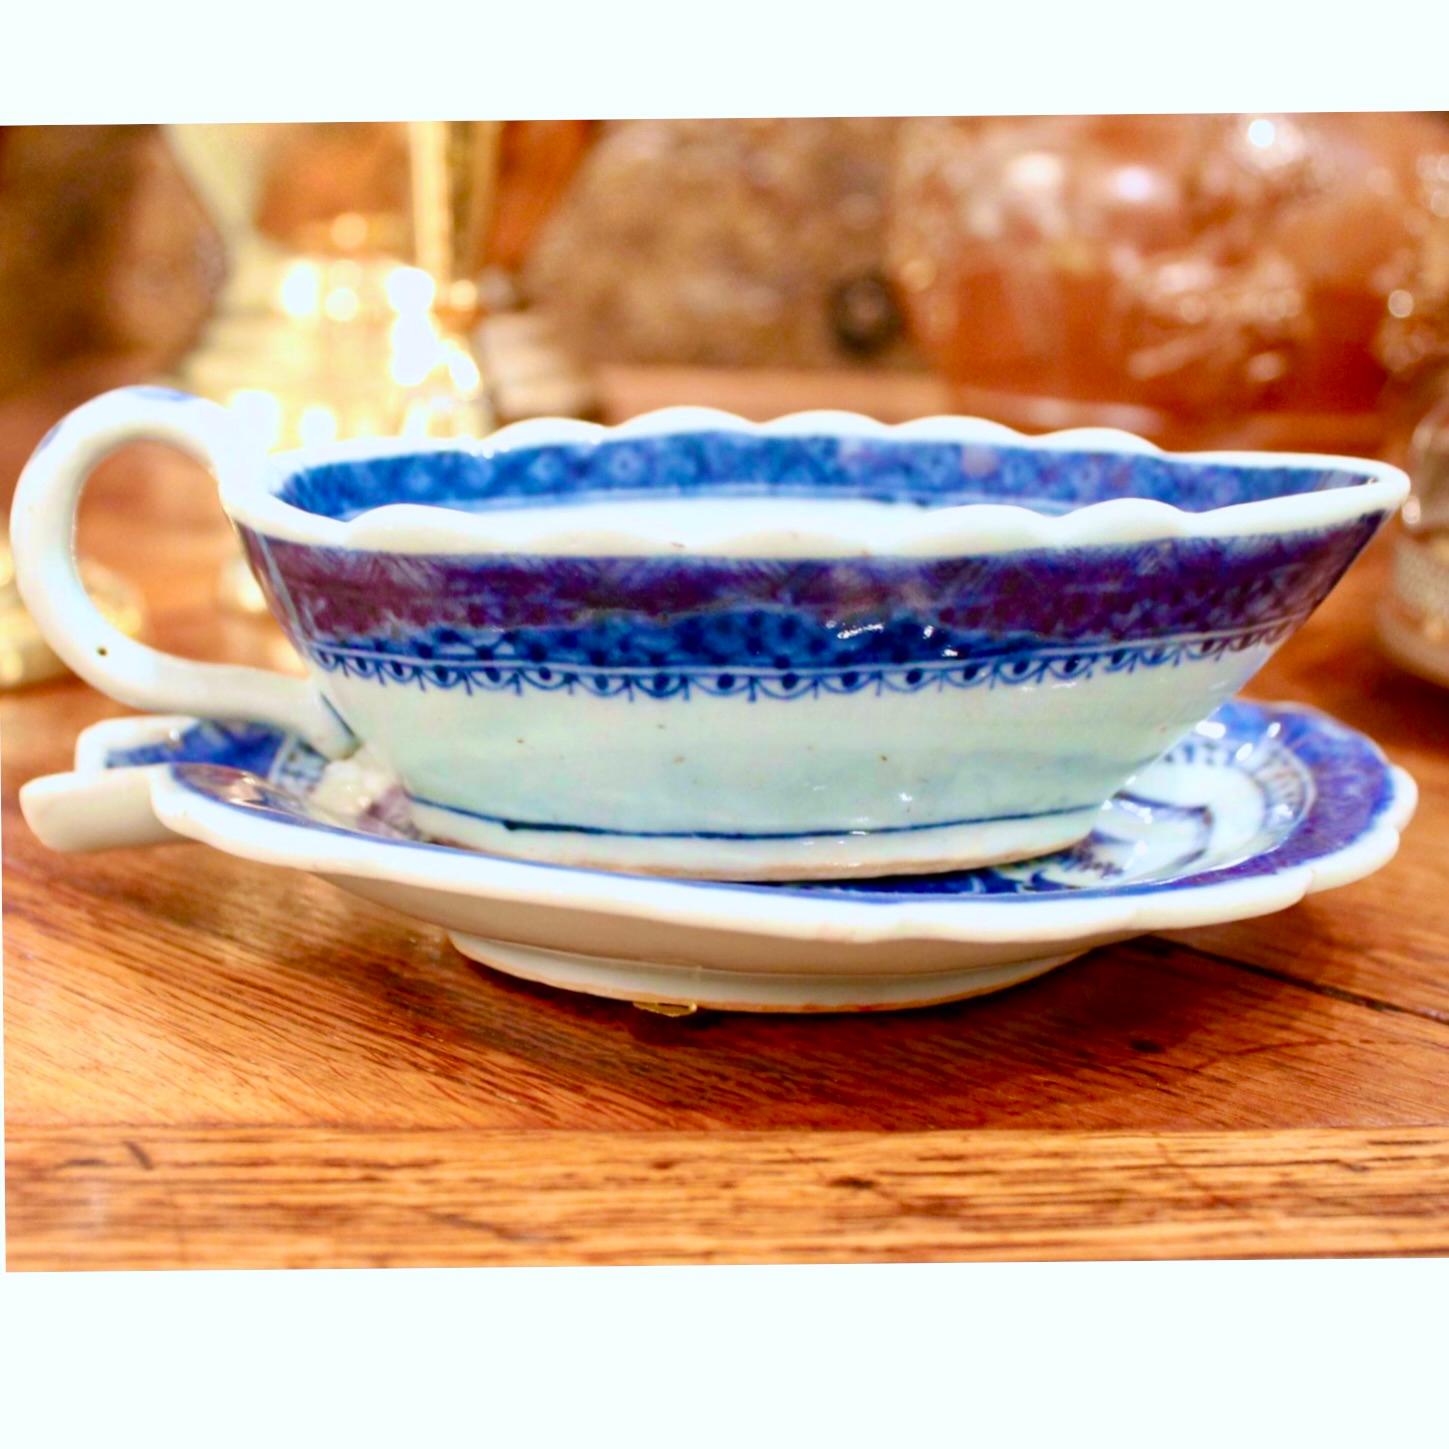 An unusual serving piece: an early 19th century Nanking sauceboat with associated leaf form undertray. This pattern is a close cousin to blue and white Canton porcelain, but with more detail. Sauce boat in excellent condition, the leaf form